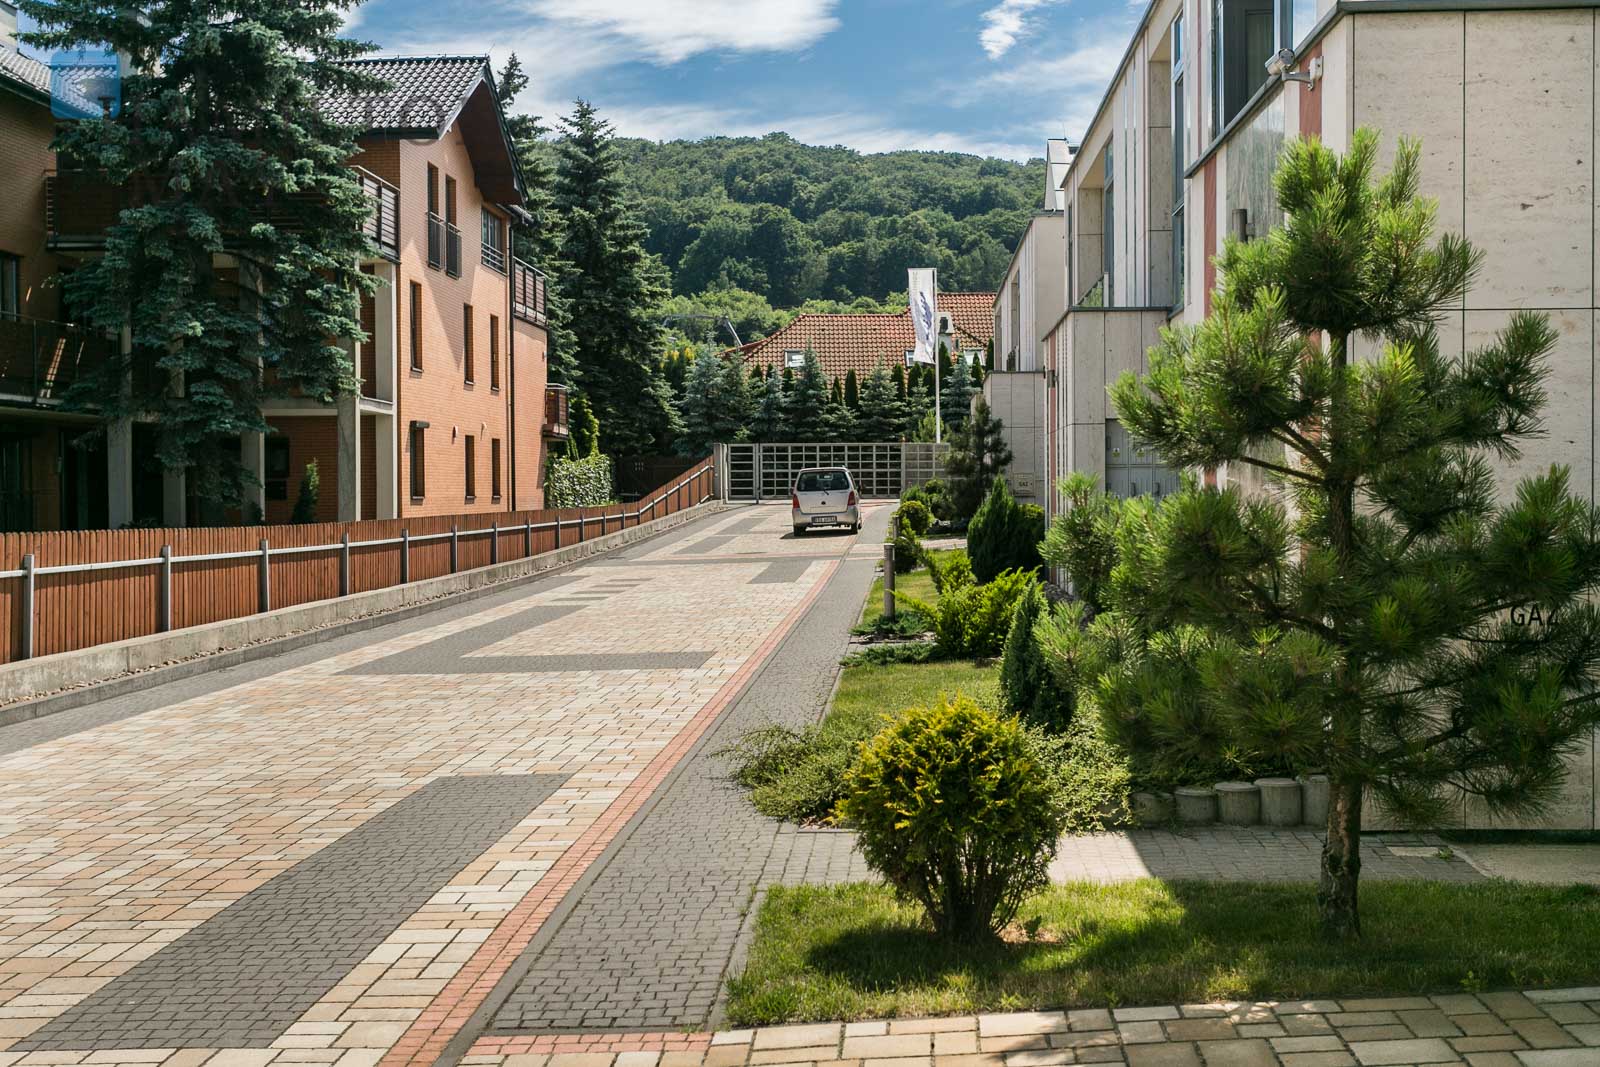 Unique, high quality Sowiniec Apartments in Wola Justowska